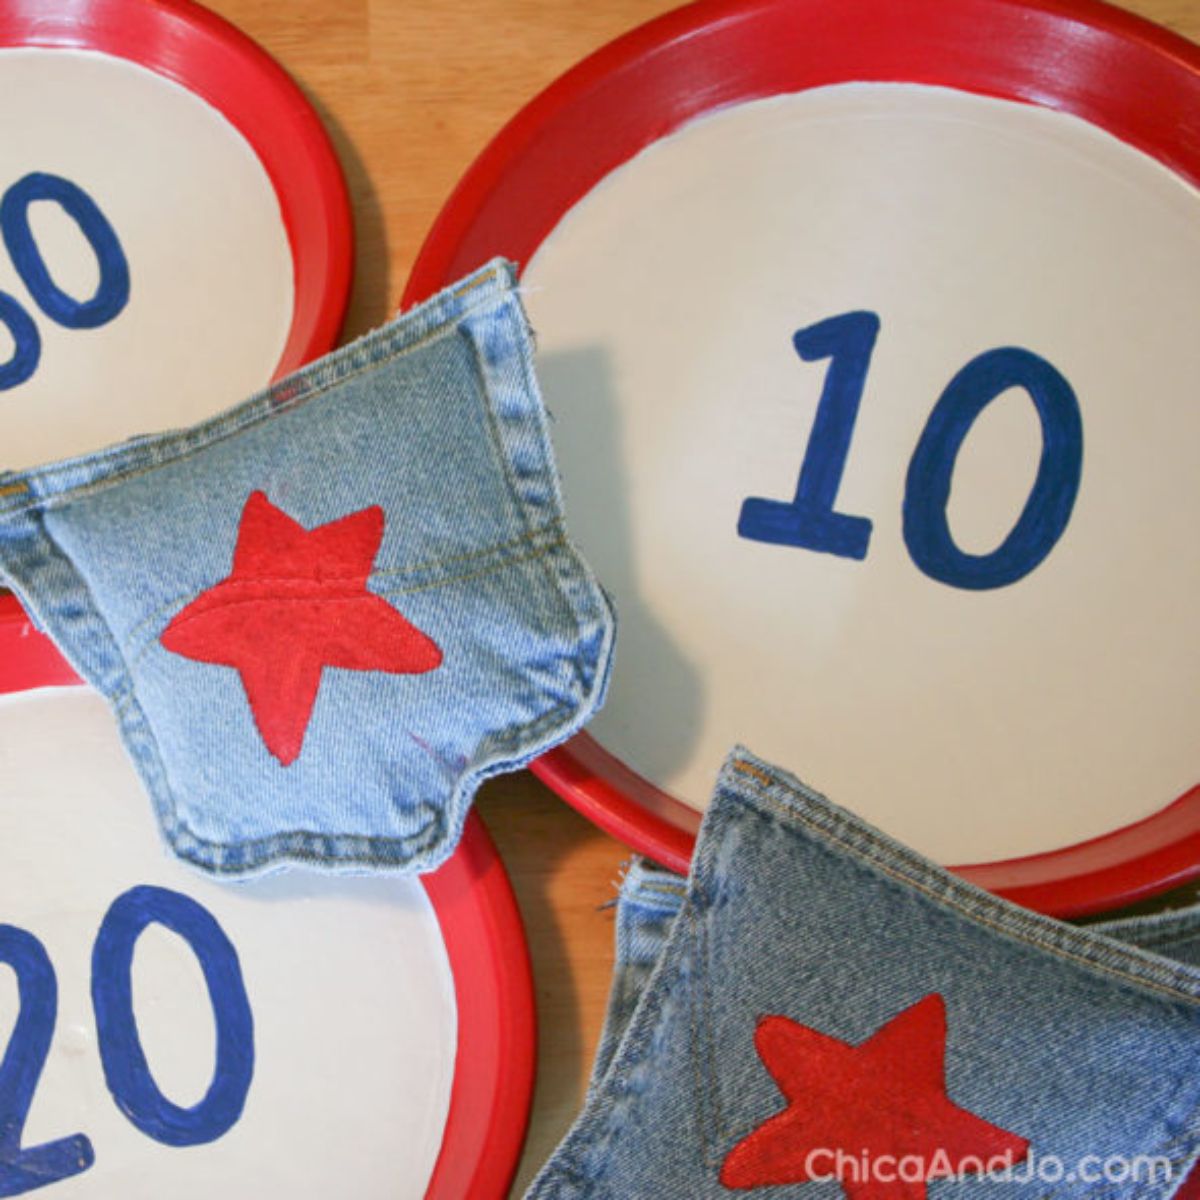 3 red paper plates with "10" "20" and "30" on them. 2 bean bags made out of denim